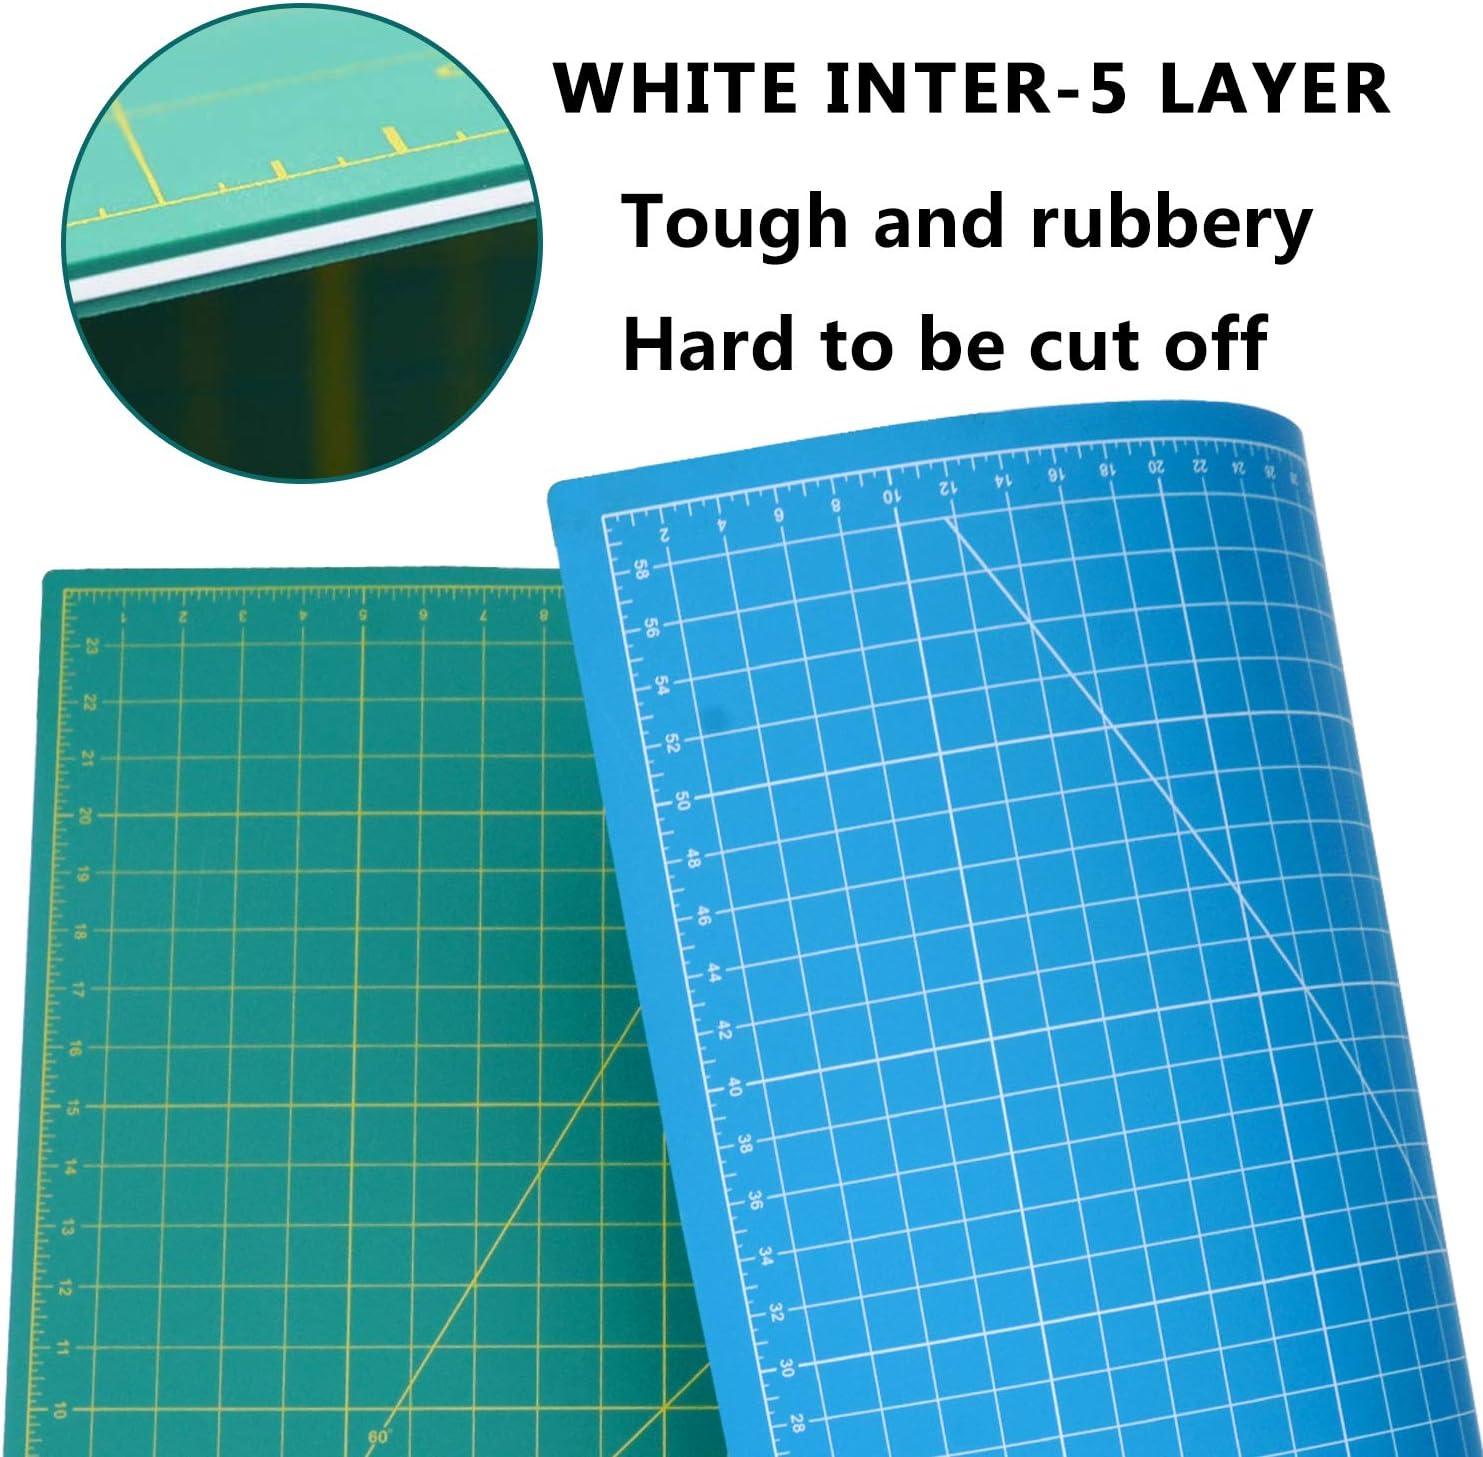 Double Sided Self Healing Cutting Mat, Rotary Cutting Board With Grid & Non  Slip Surface, Rotary Cutter For Craft, Fabric, Quilting, Sewing, Scrapbook